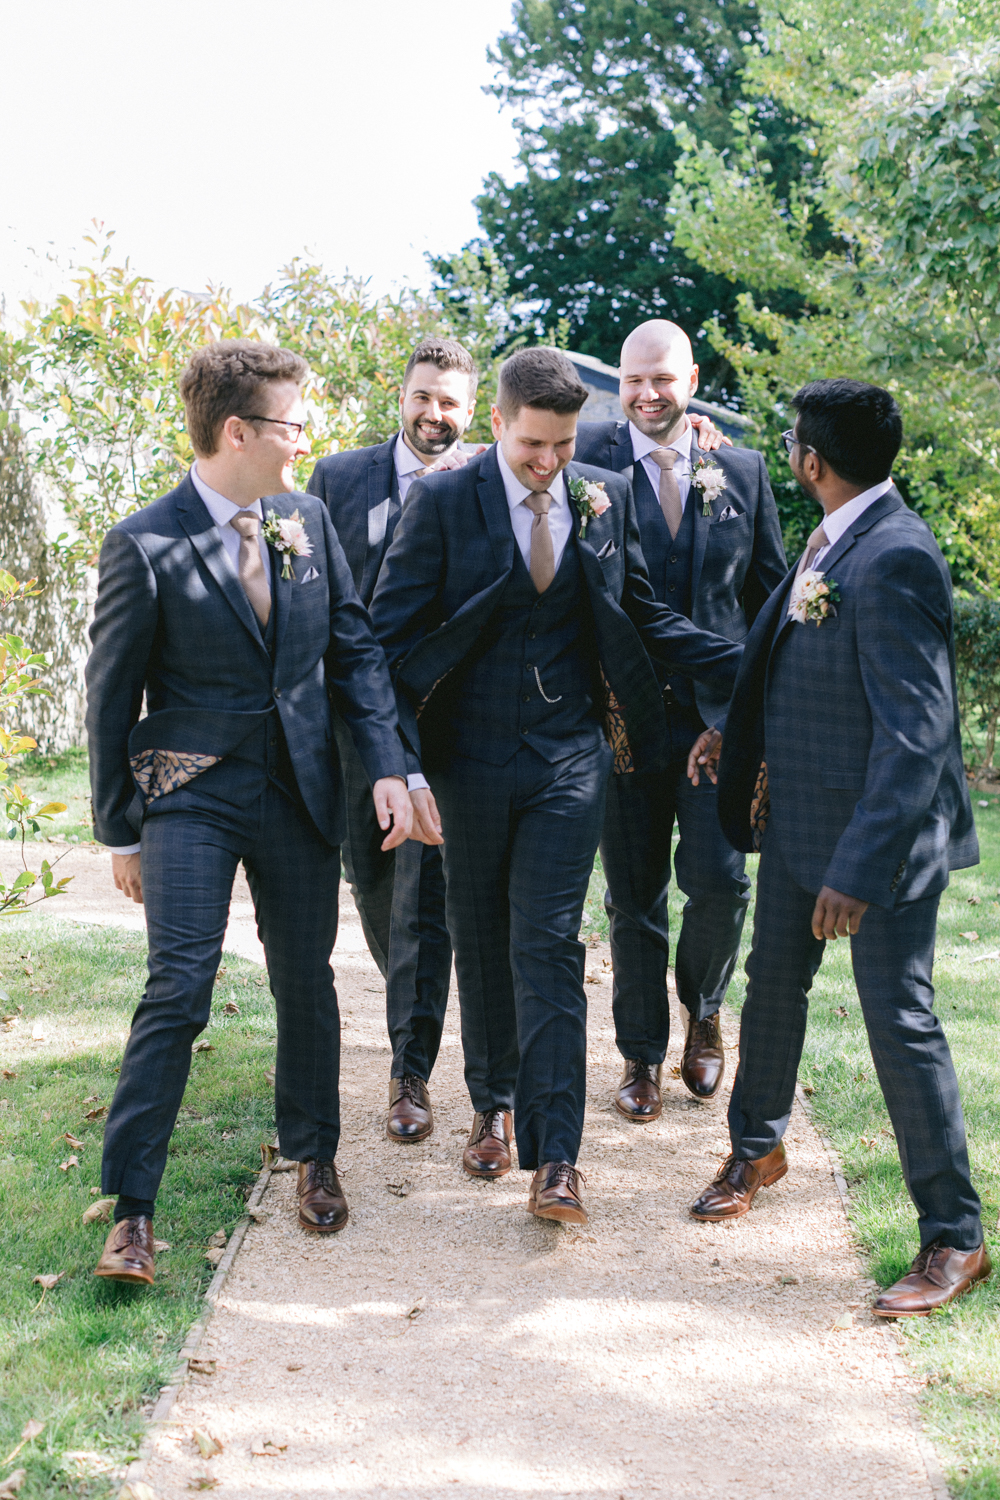 The groom and his groomsmen get ready for the wedding ceremony